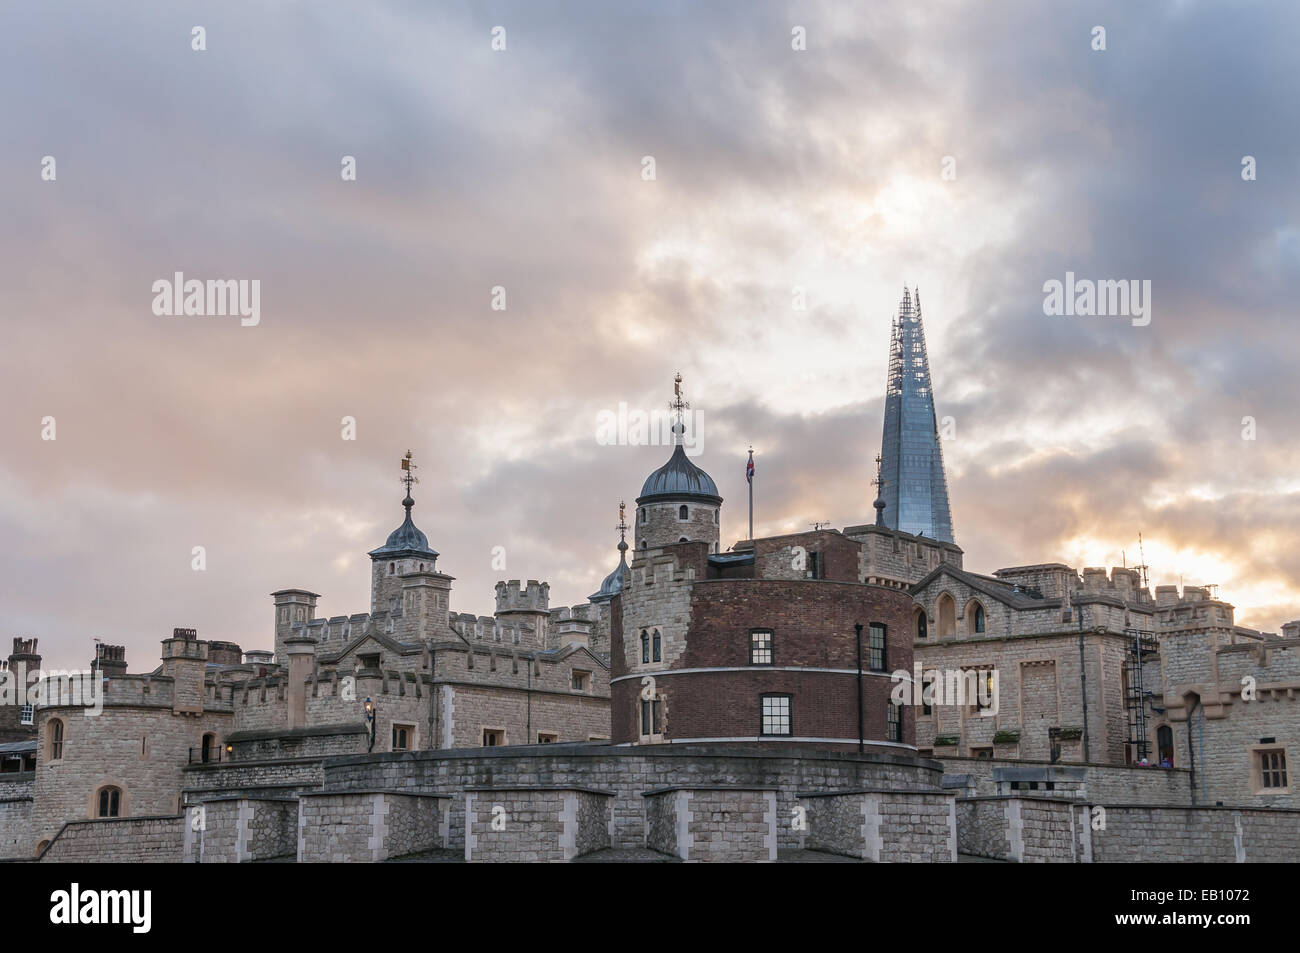 Closeup of Tower of London architecture with The Shard skyscraper in the background at sunset, UK Stock Photo